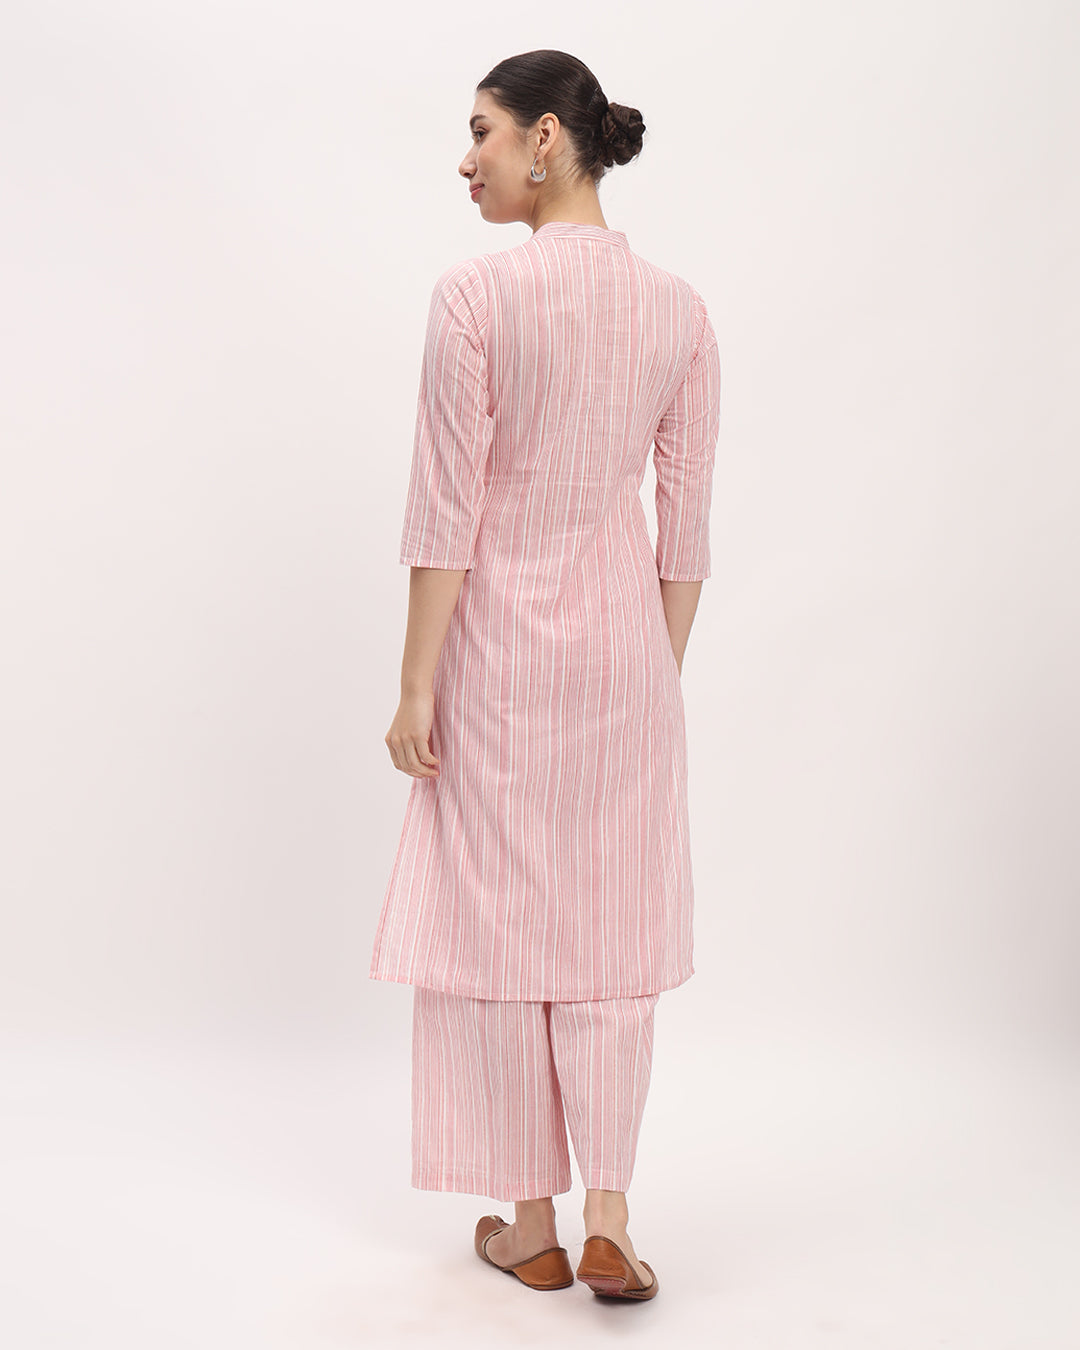 Combo: English Floral Garden & Pink Chic Lines High-Low Printed Kurta (Without Bottoms)